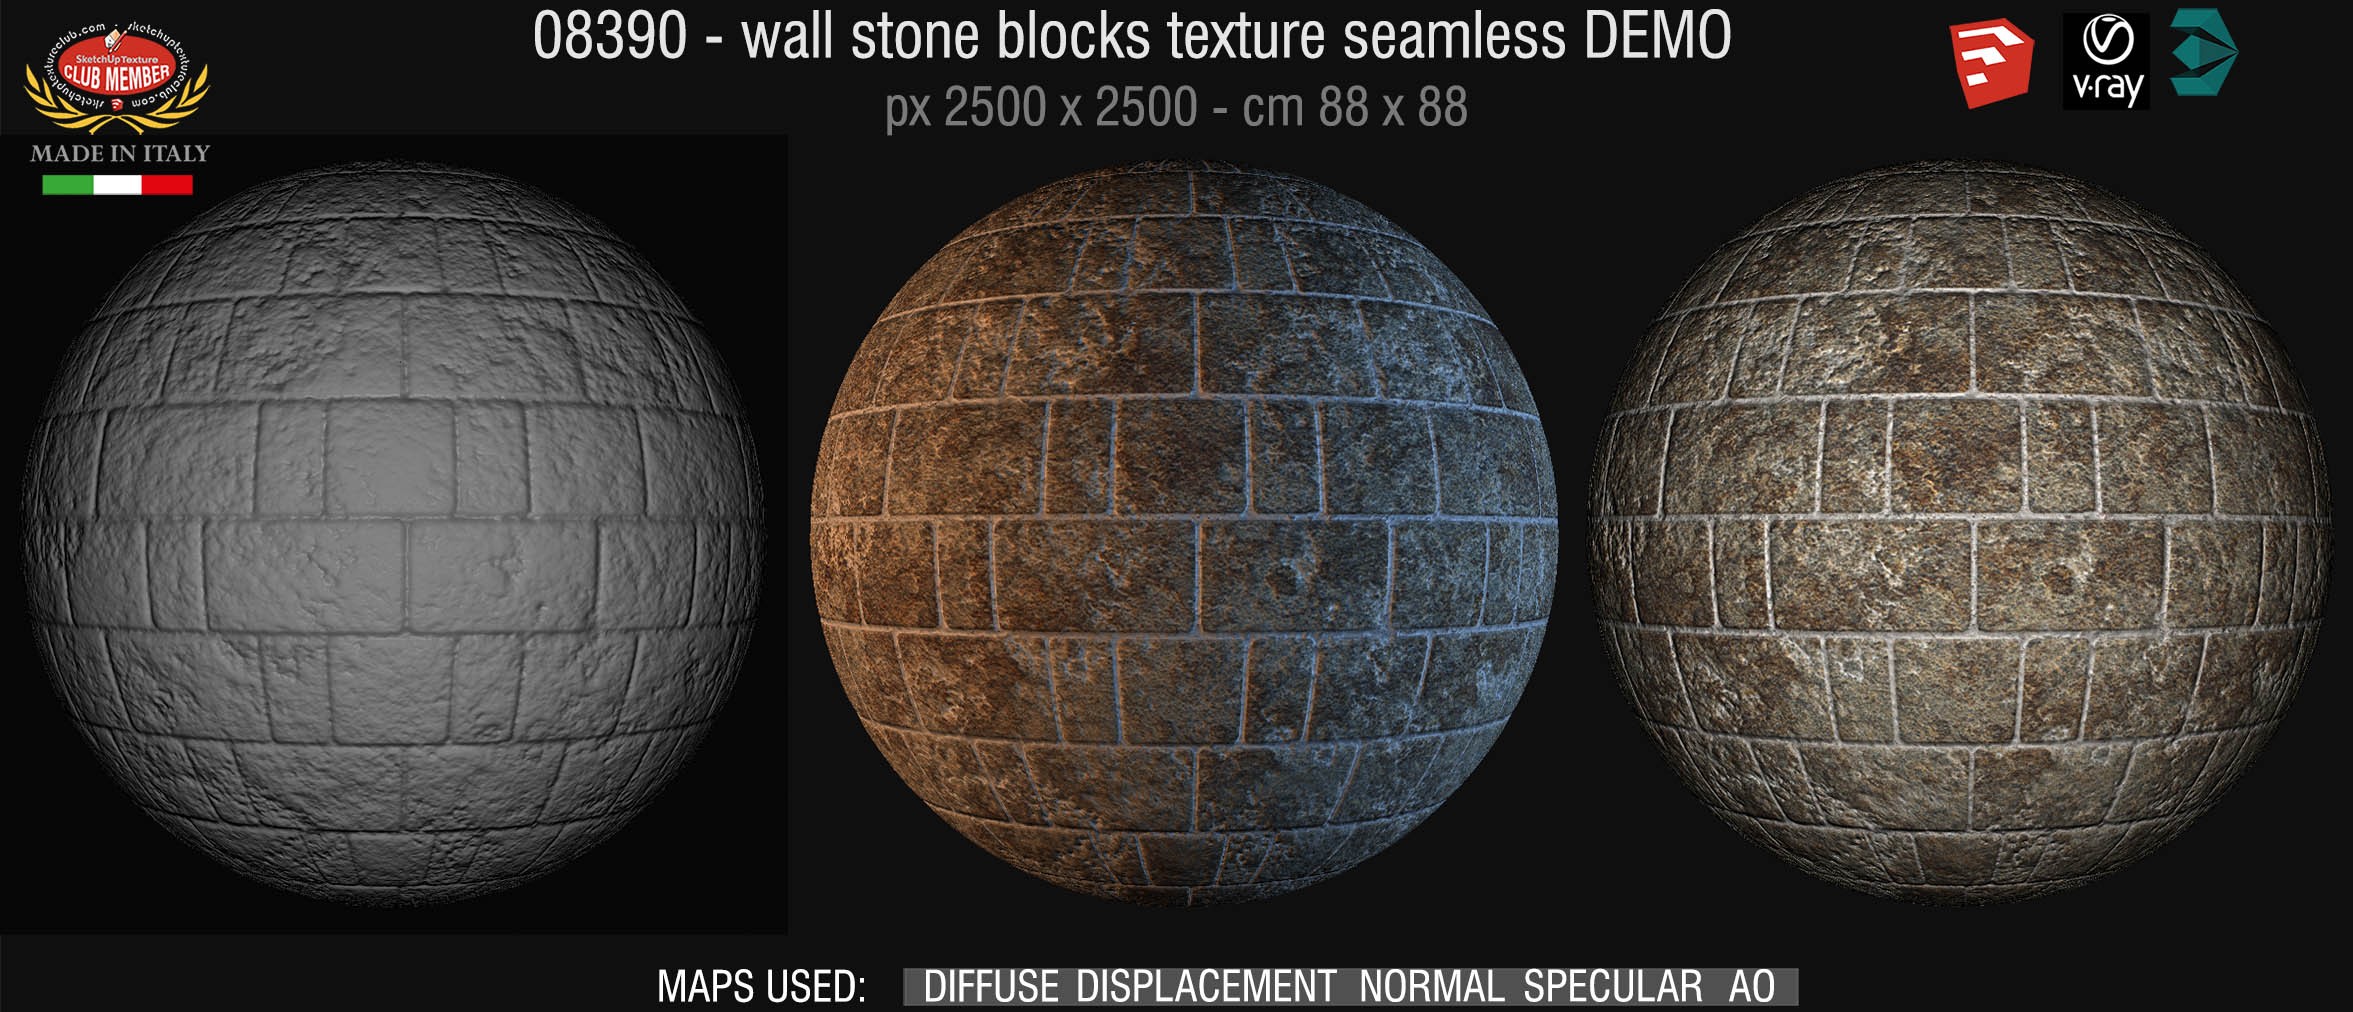 08390 HR Wall stone with regular blocks texture + maps DEMO